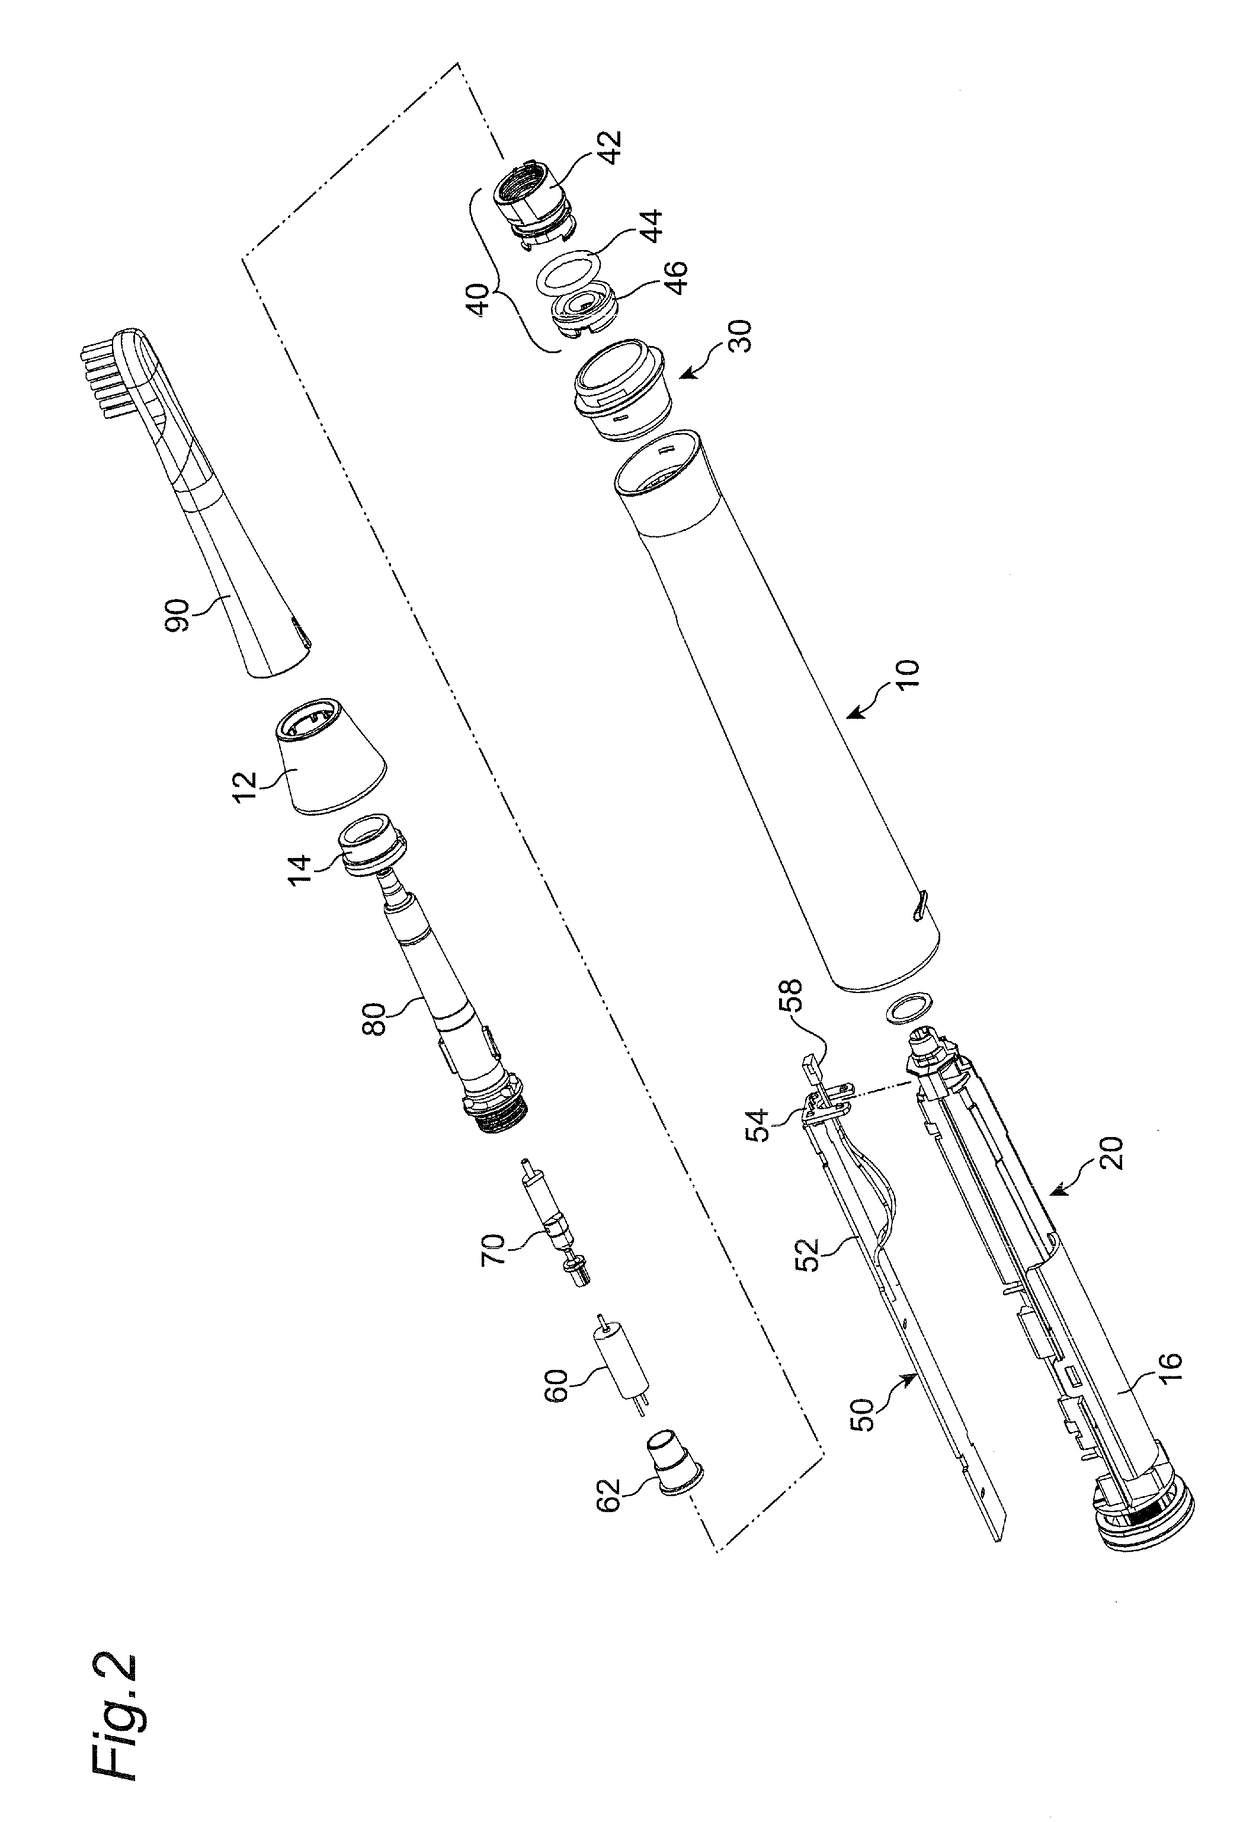 Electric Toothbrush with Rigidly Connected Grip Portion and Brush Portion